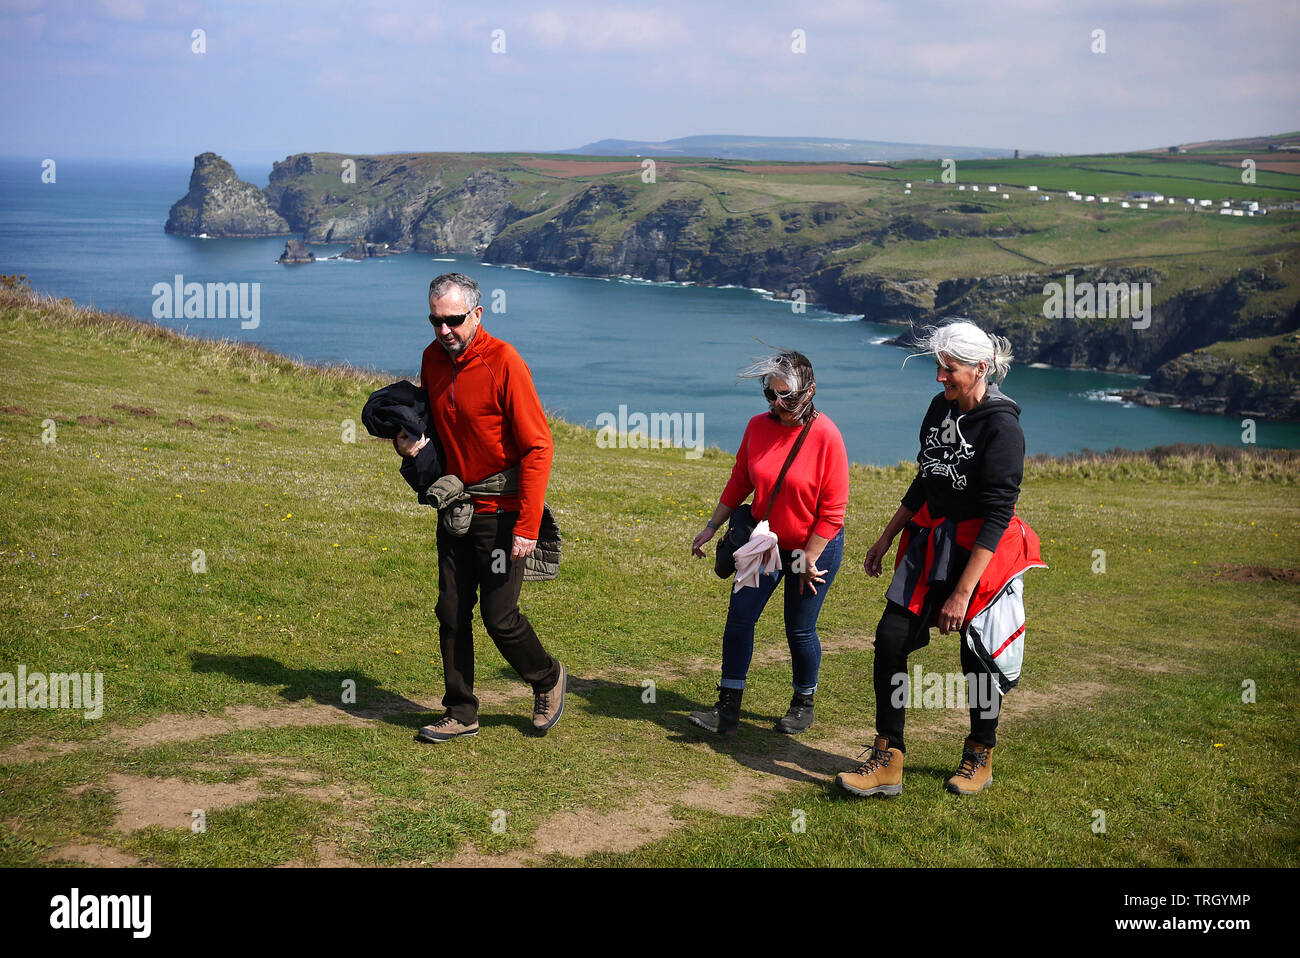 Walkers on the South West Coast Path between Boscastle and Tintagel in Cornwall, UK. Stock Photo